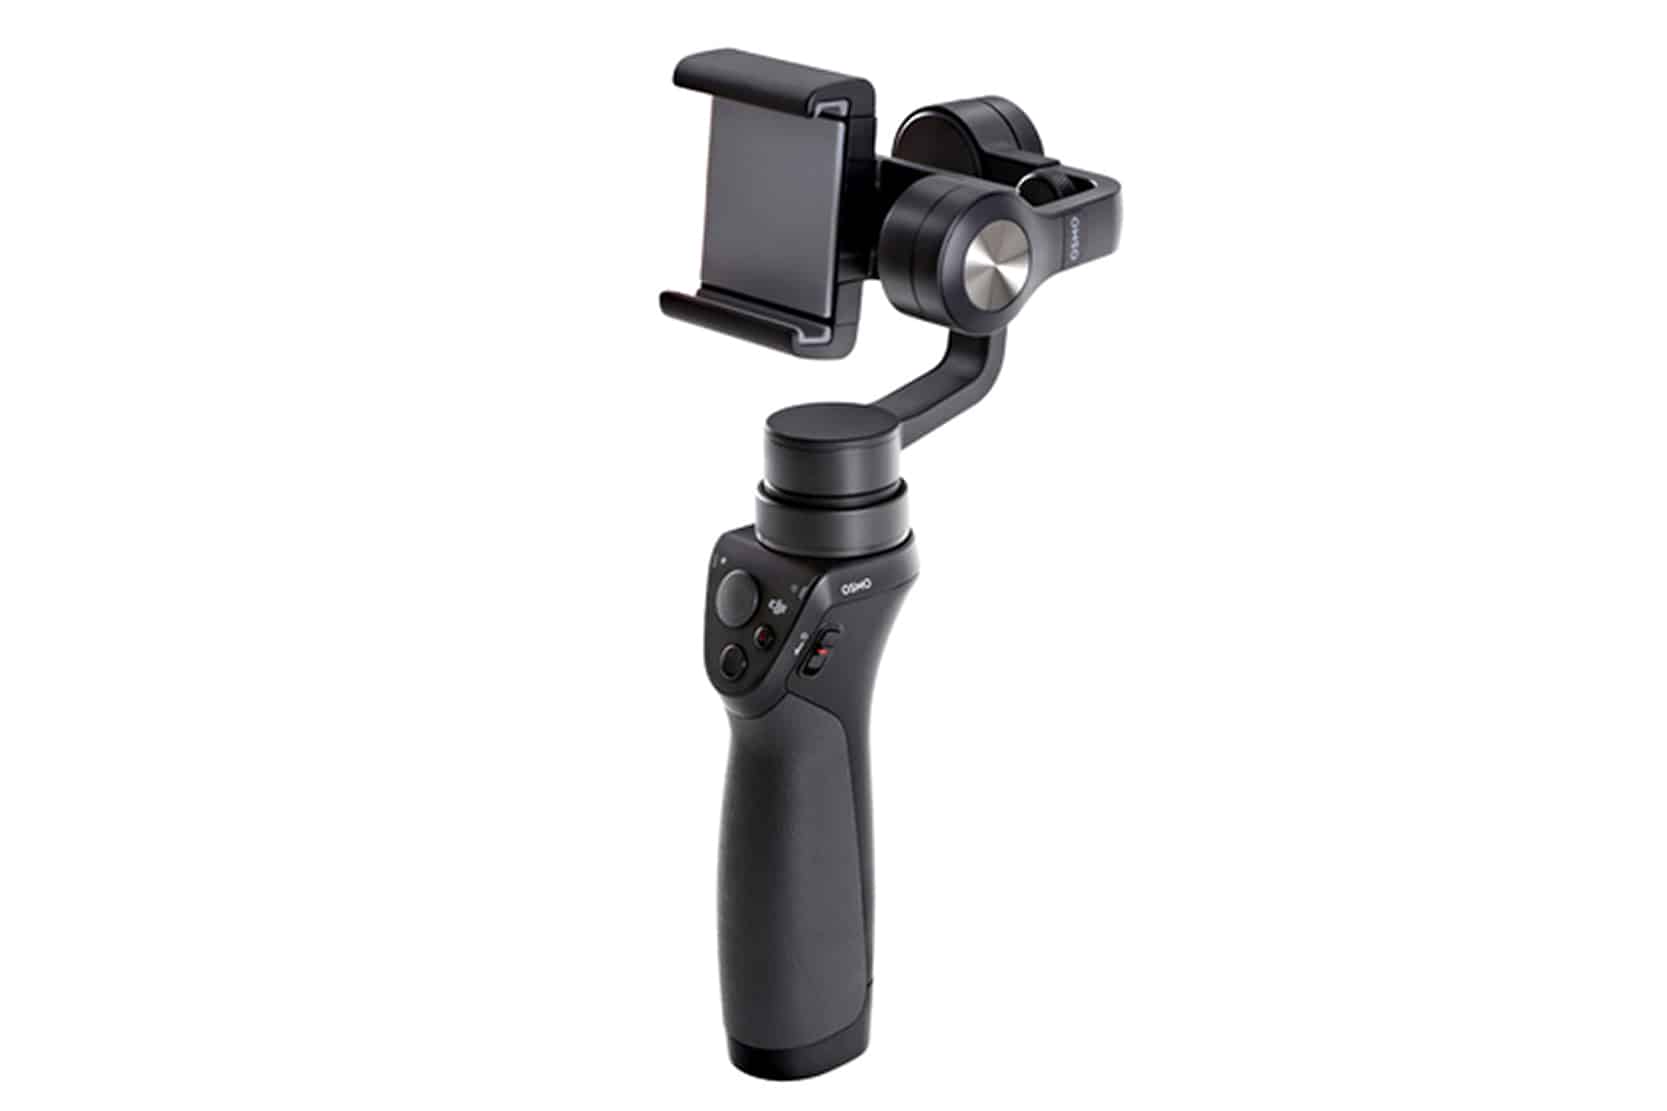 OSMO mobile camera handle in MAN'edged Magazine's best gift ideas for the tech guy